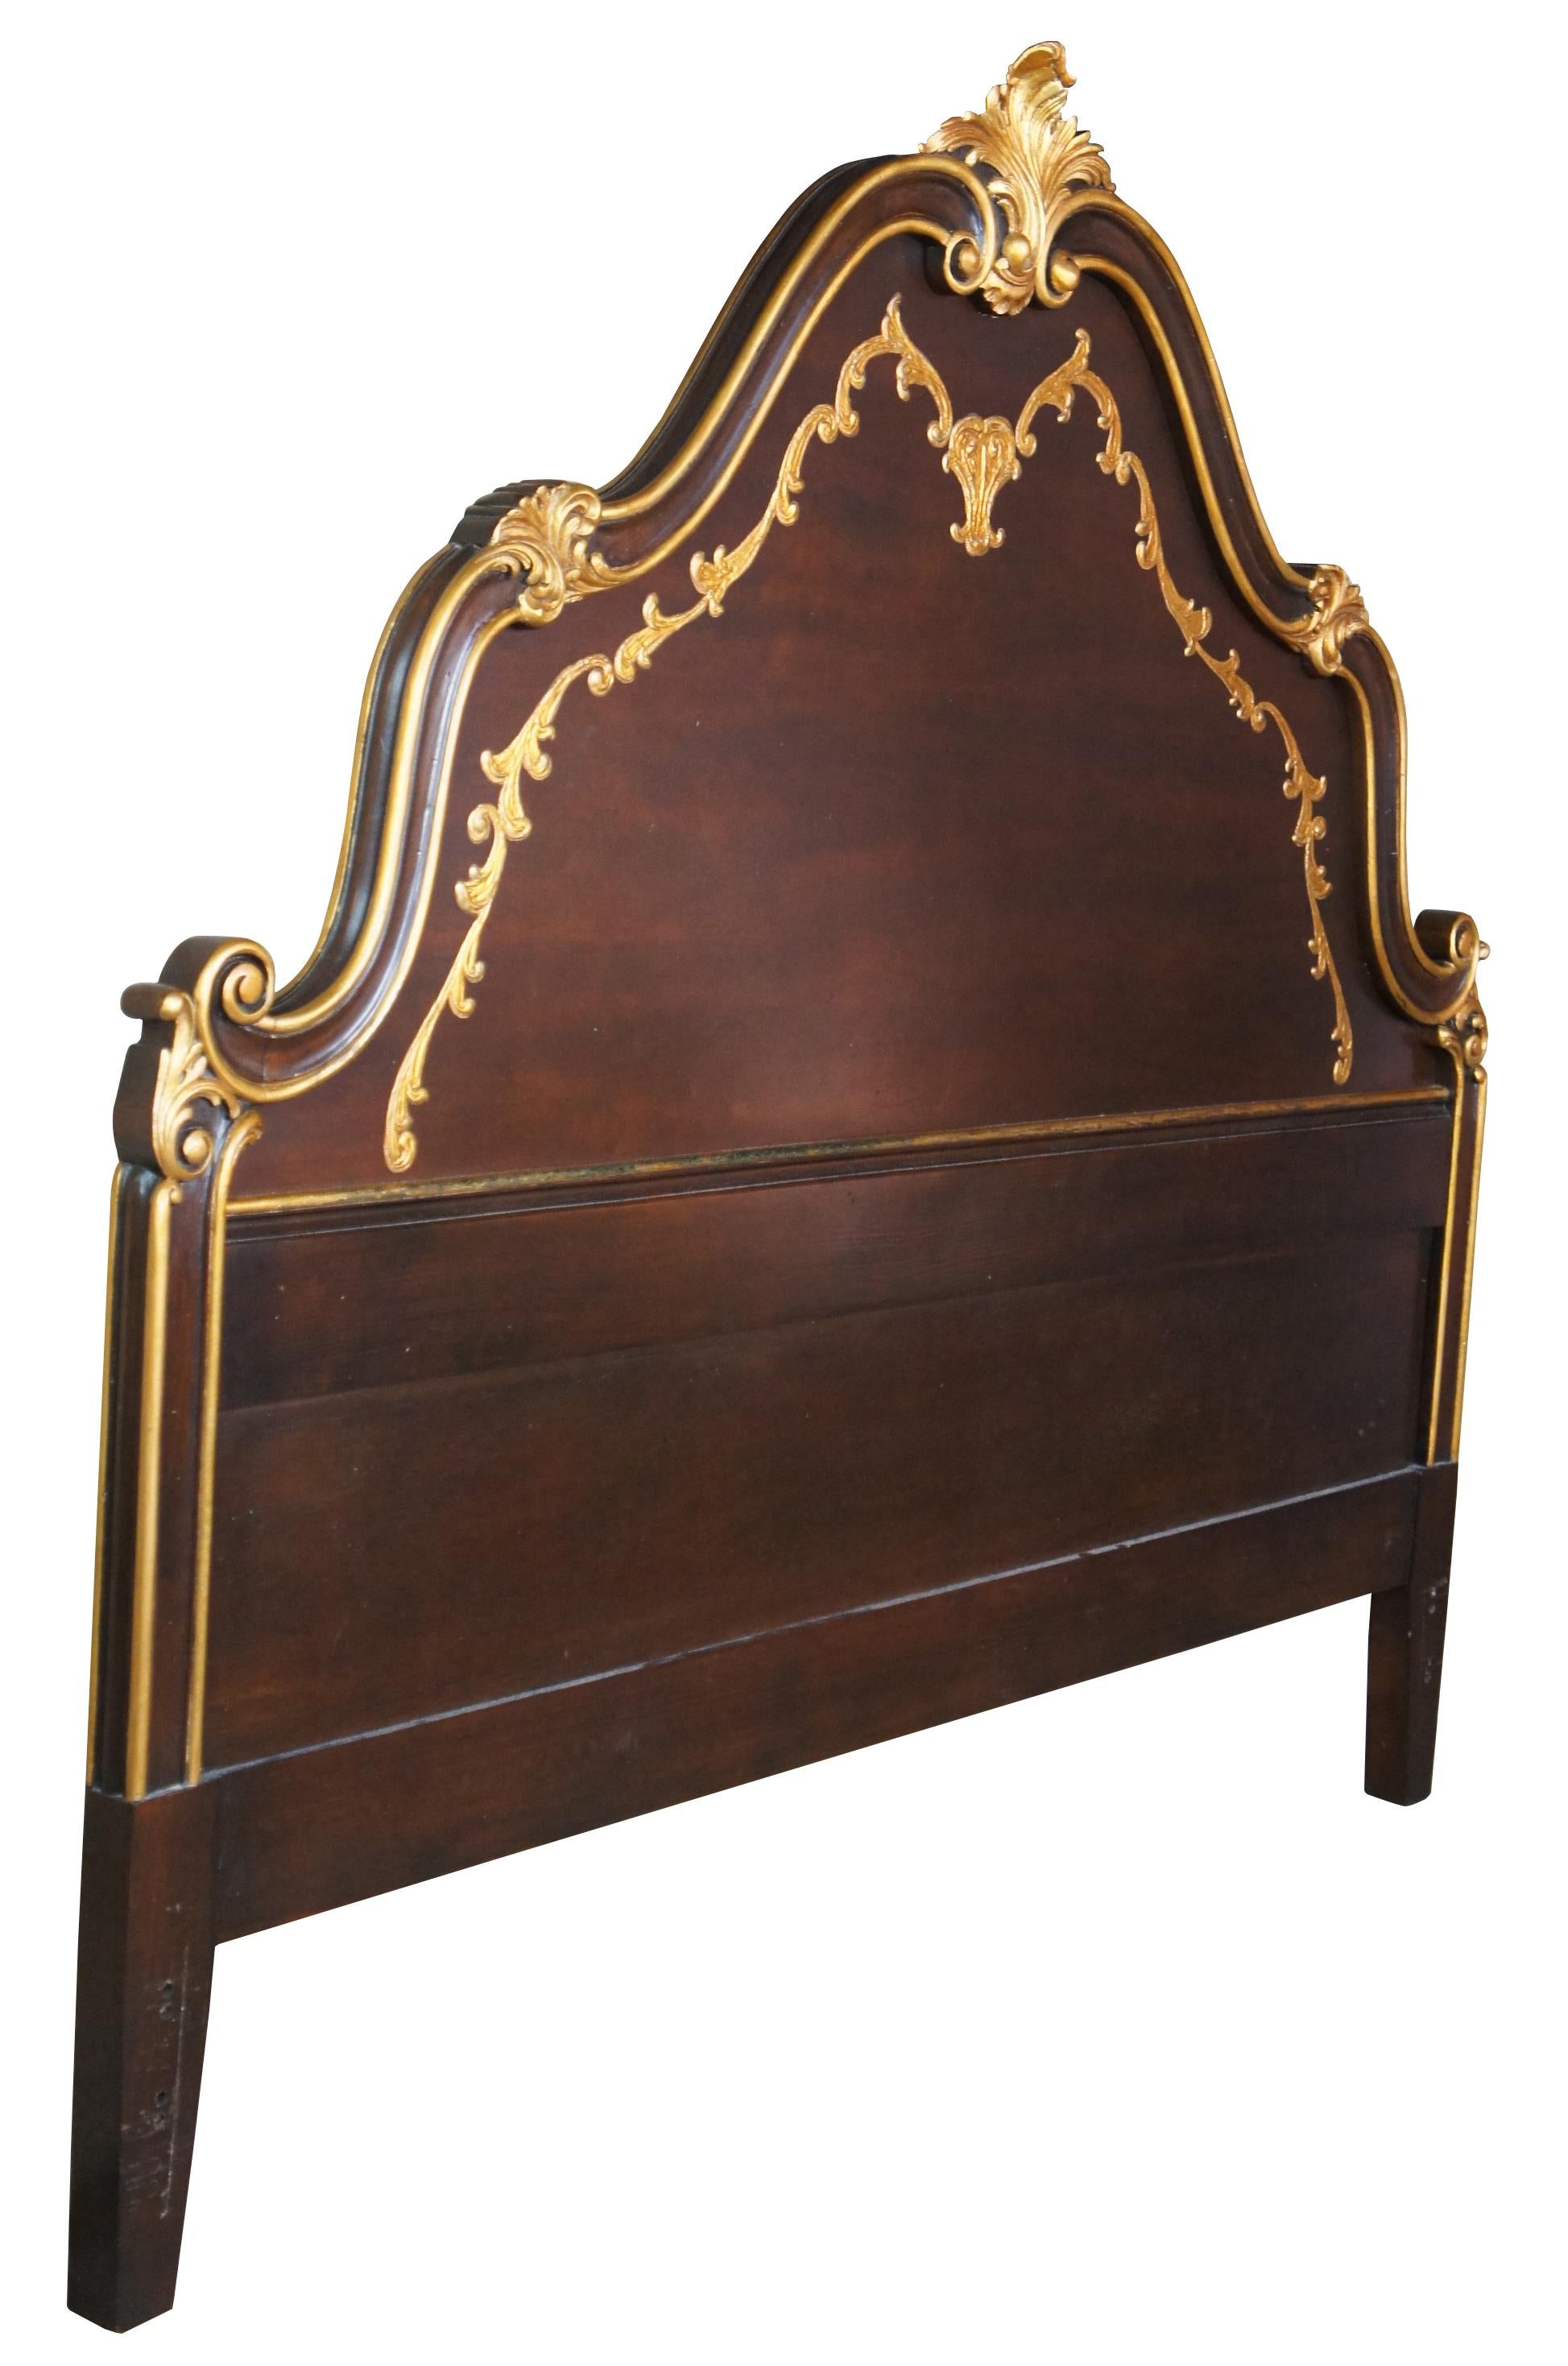 Vintage 1981 John Widdicomb headboard. Made of French walnut featuring serpentine form with gold gilded acanthus design. 2804. Measure: 60